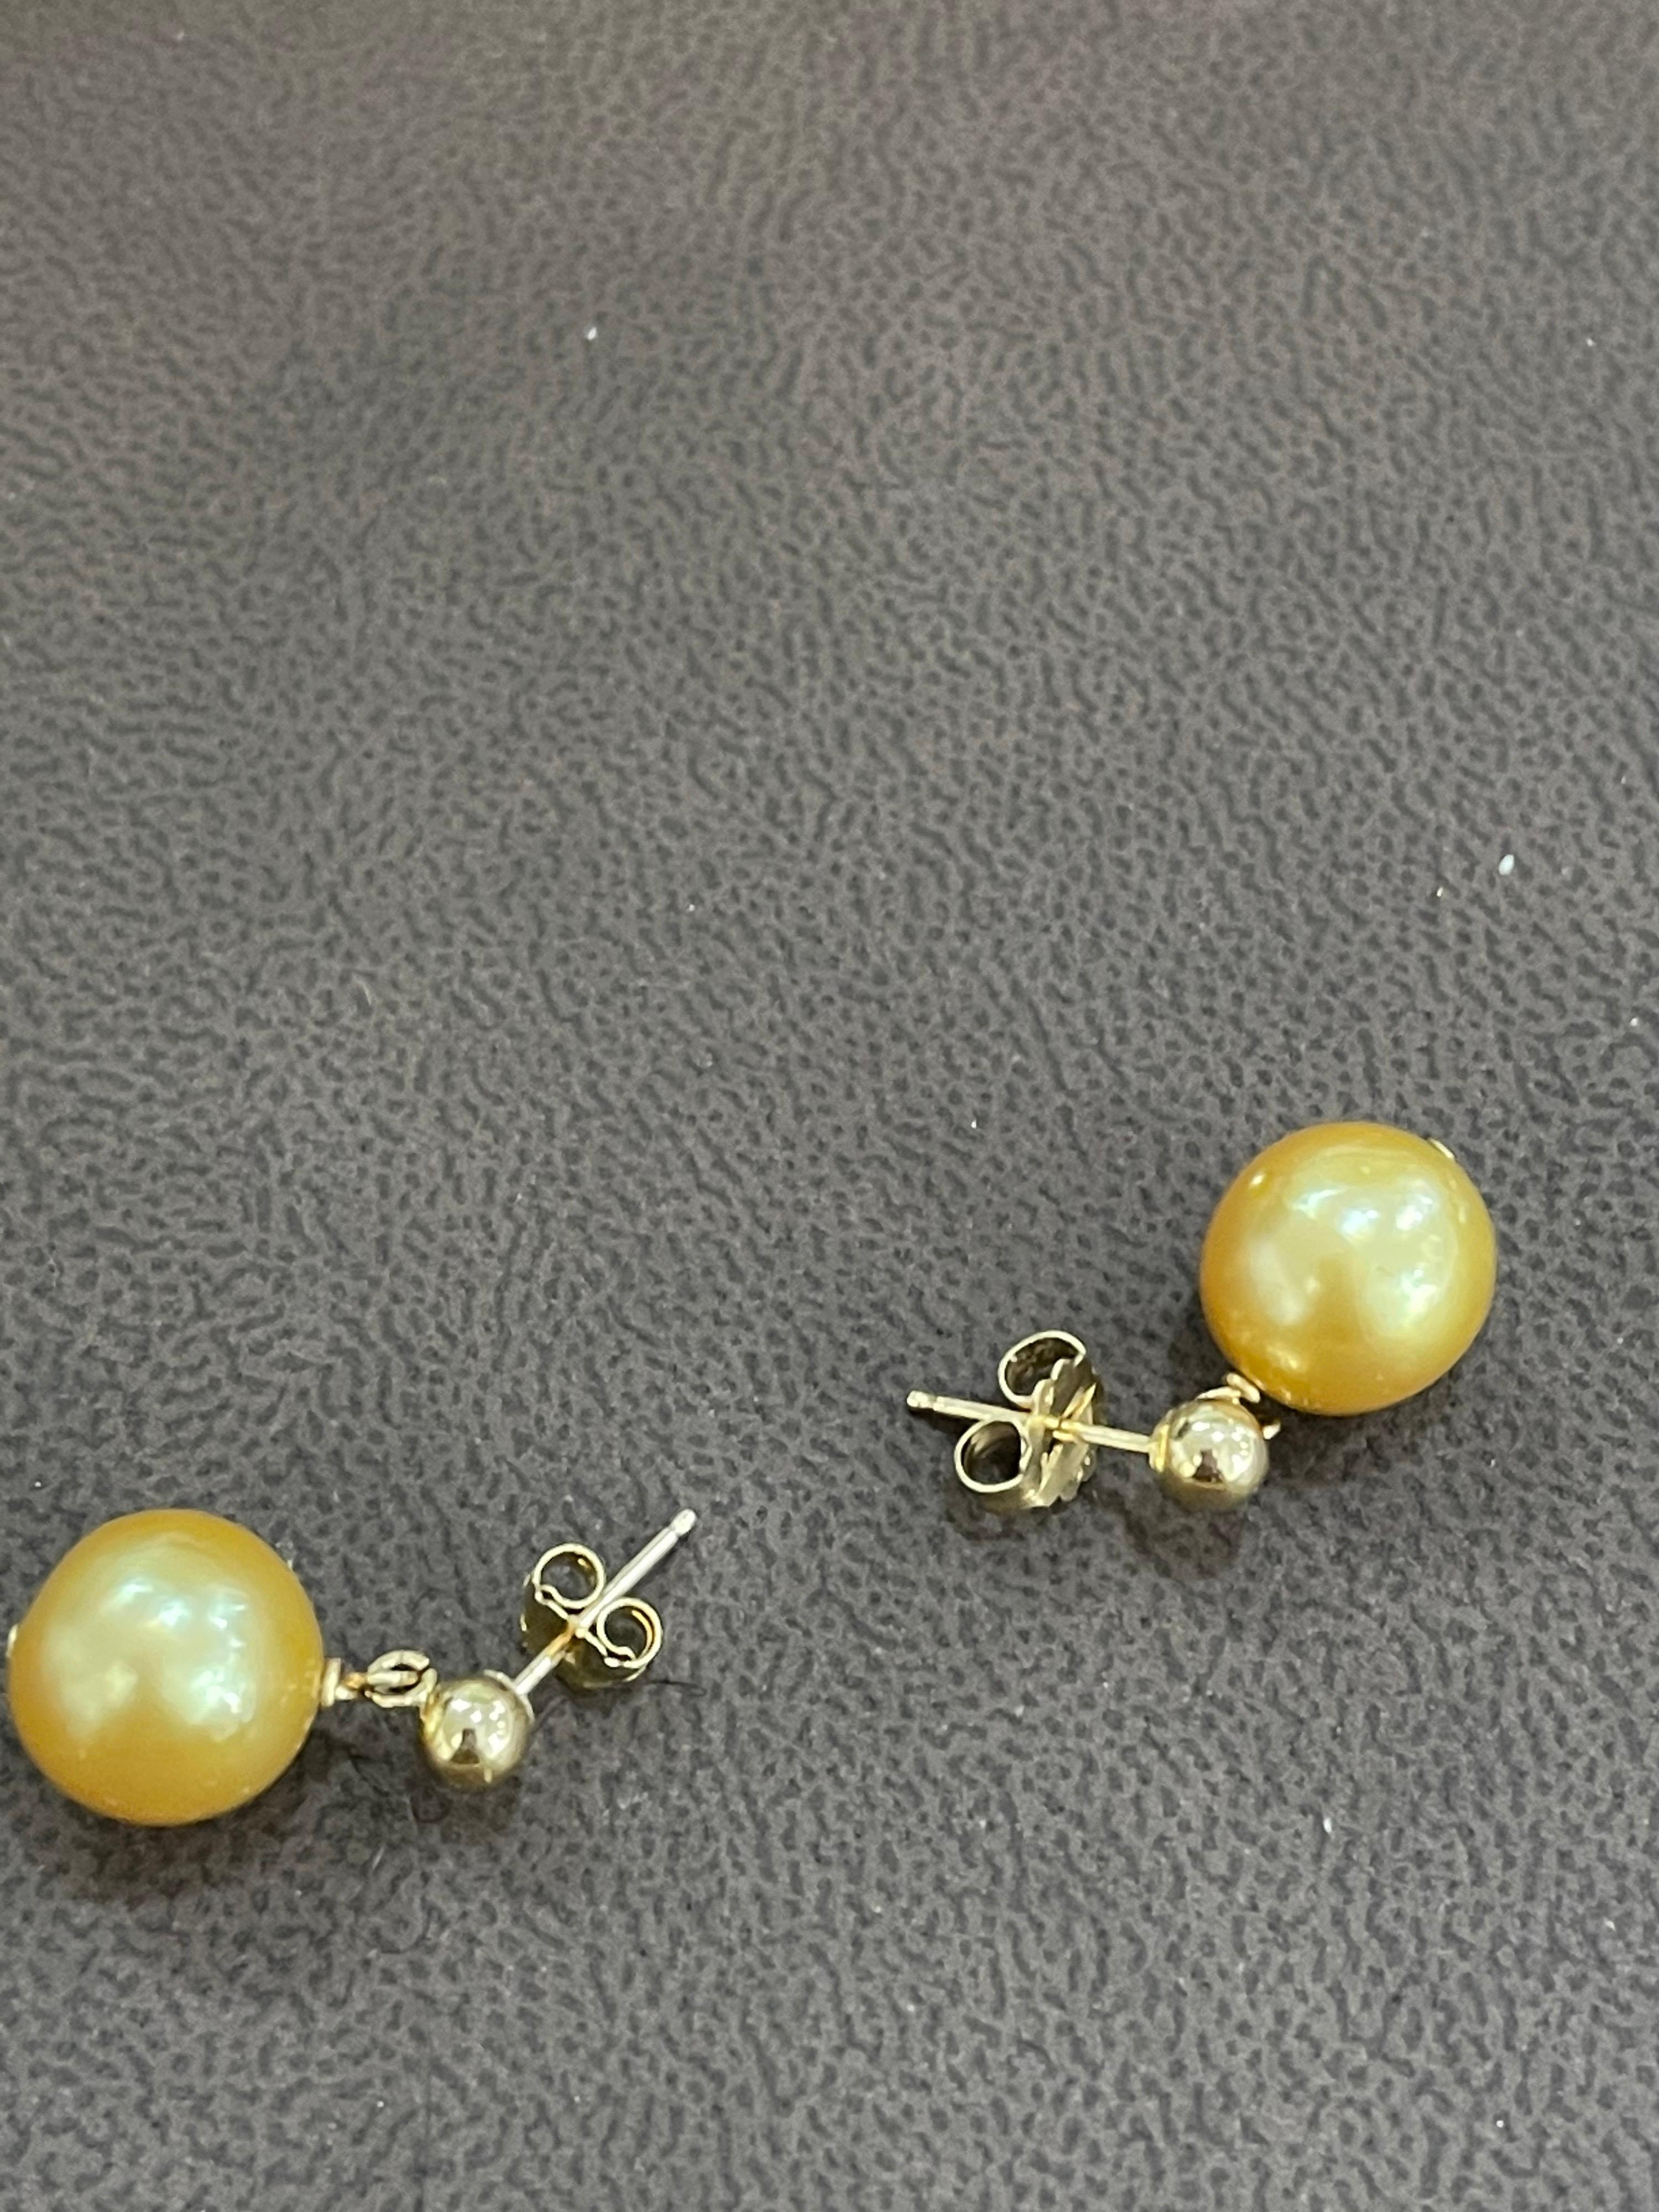 Round Cut Golden South Sea Pearl Dangling Earrings 14 Karat Yellow Gold For Sale